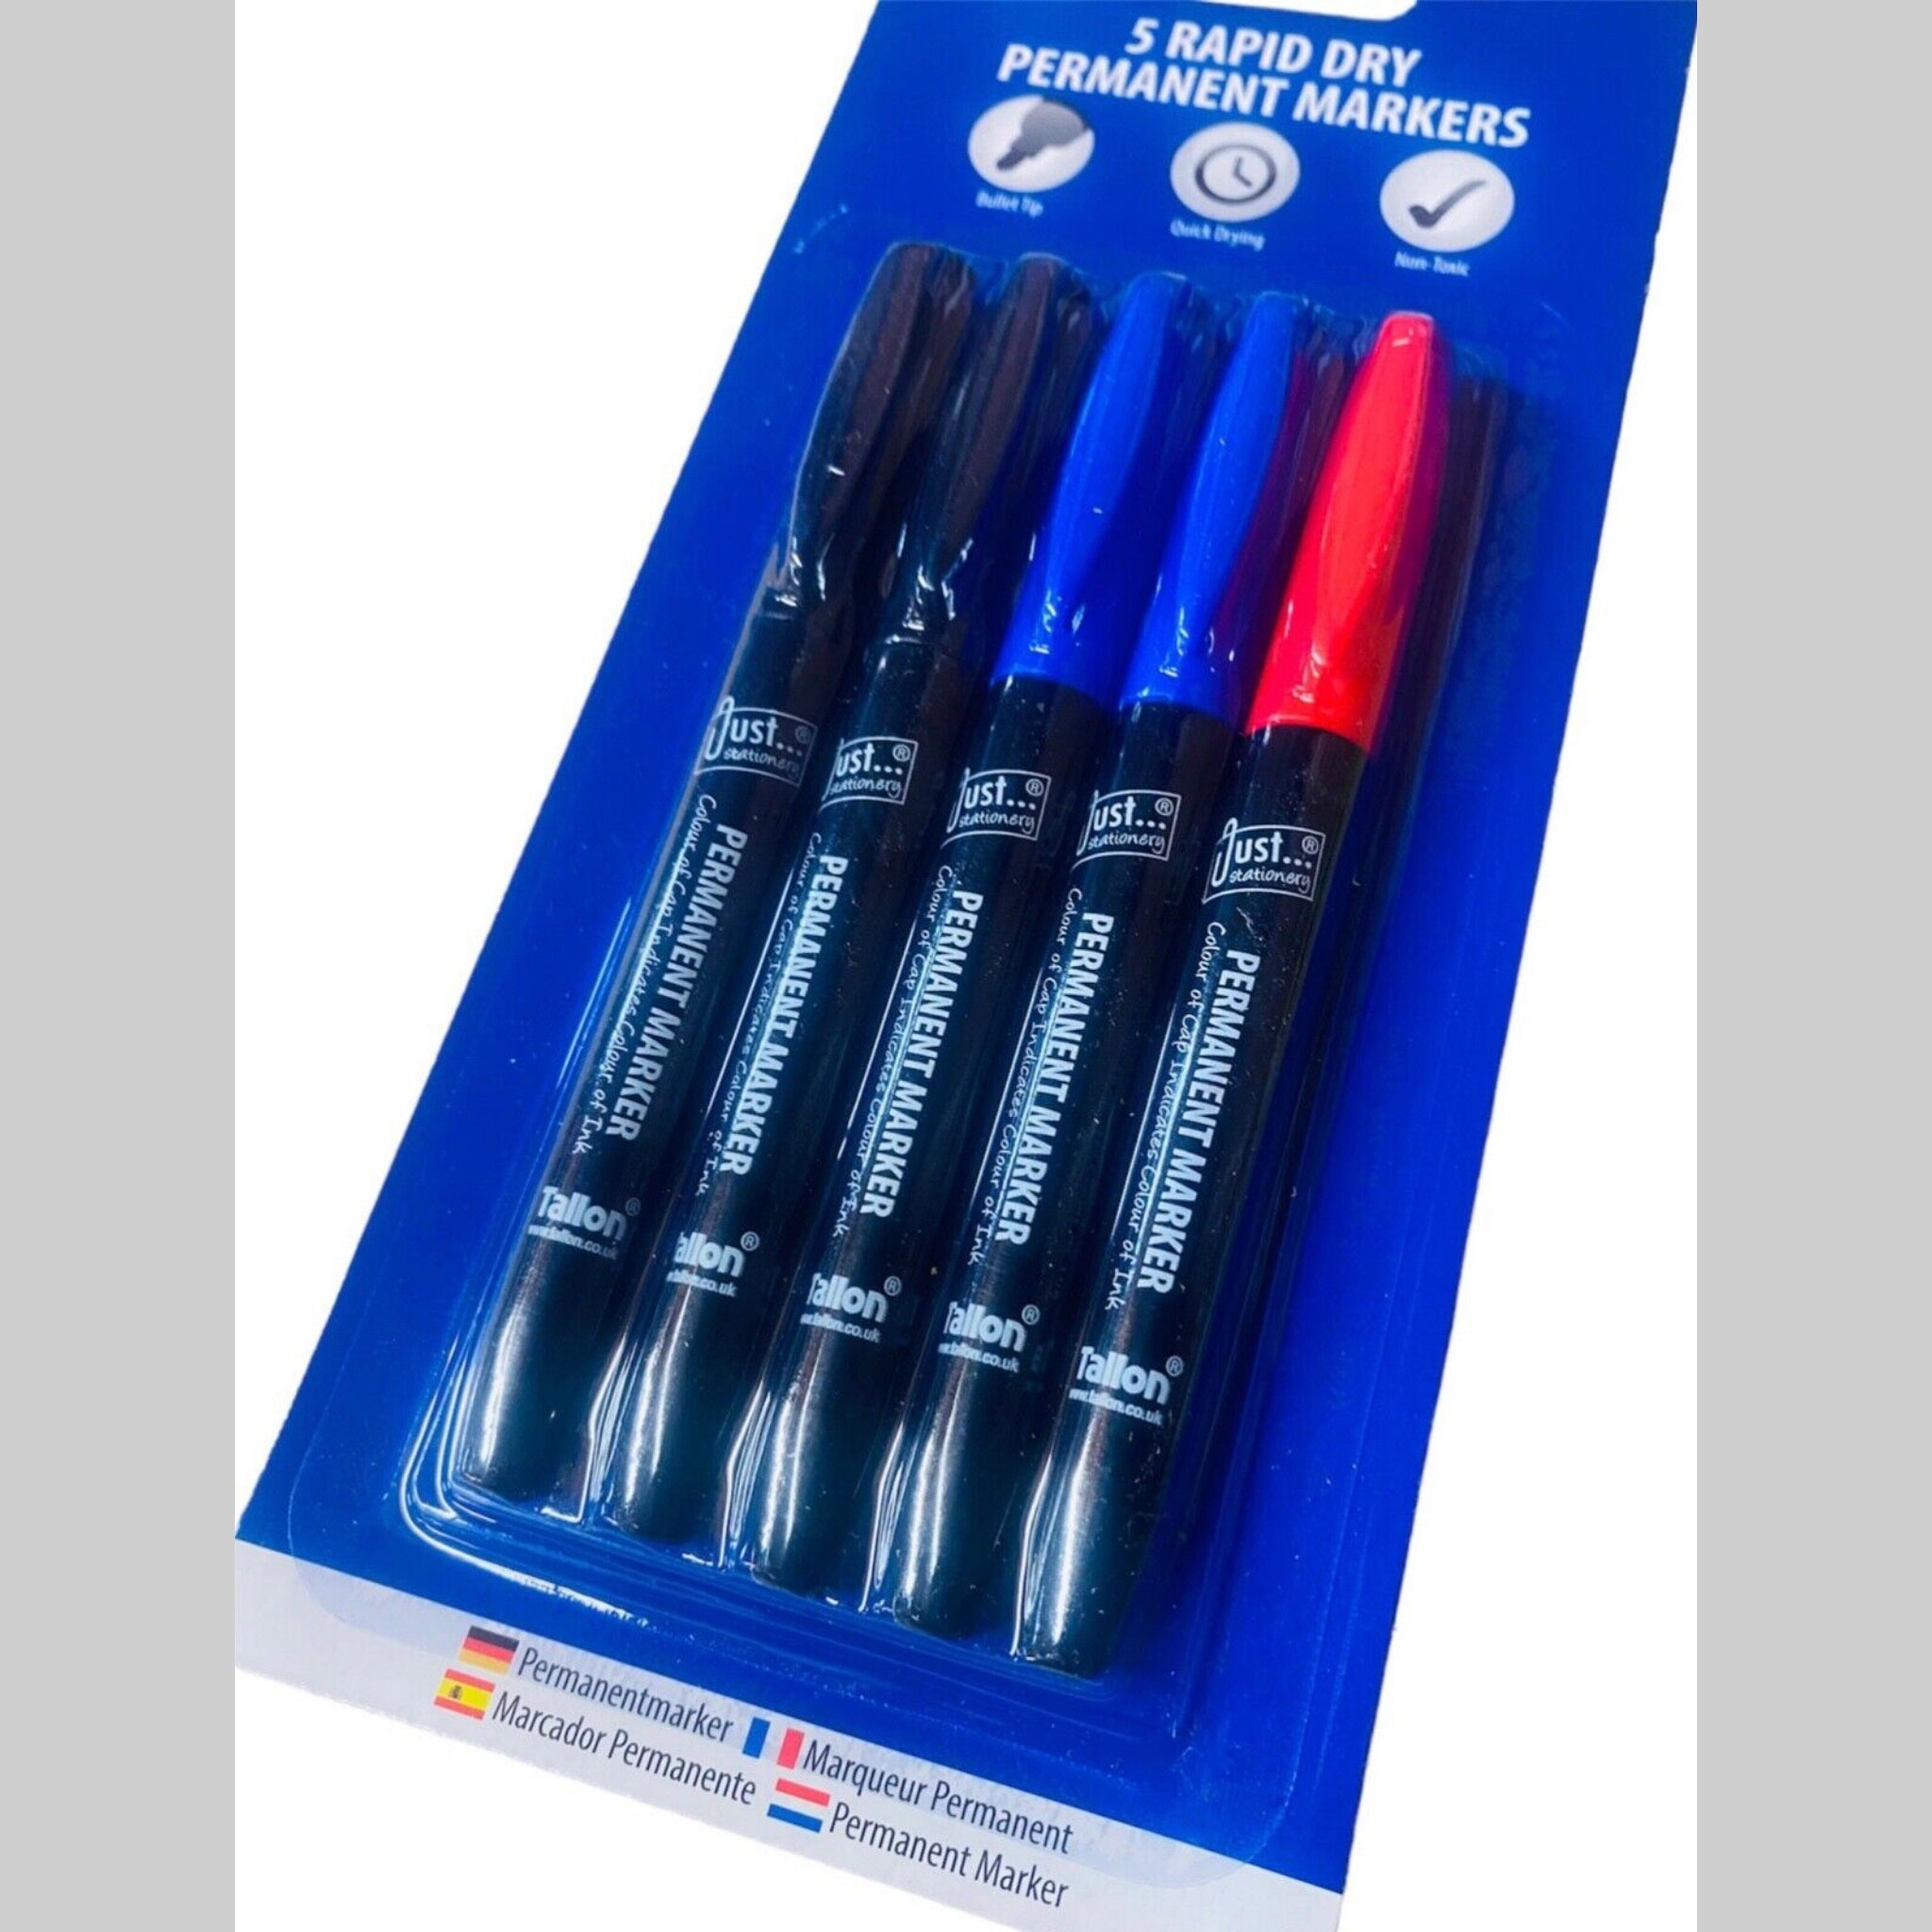 Beclen Harp 5 Rapid Dry Permanent Markers Bullet Tip Office School Assorted Colours Writing Black Red Blue Pens Point Tip CD DVD